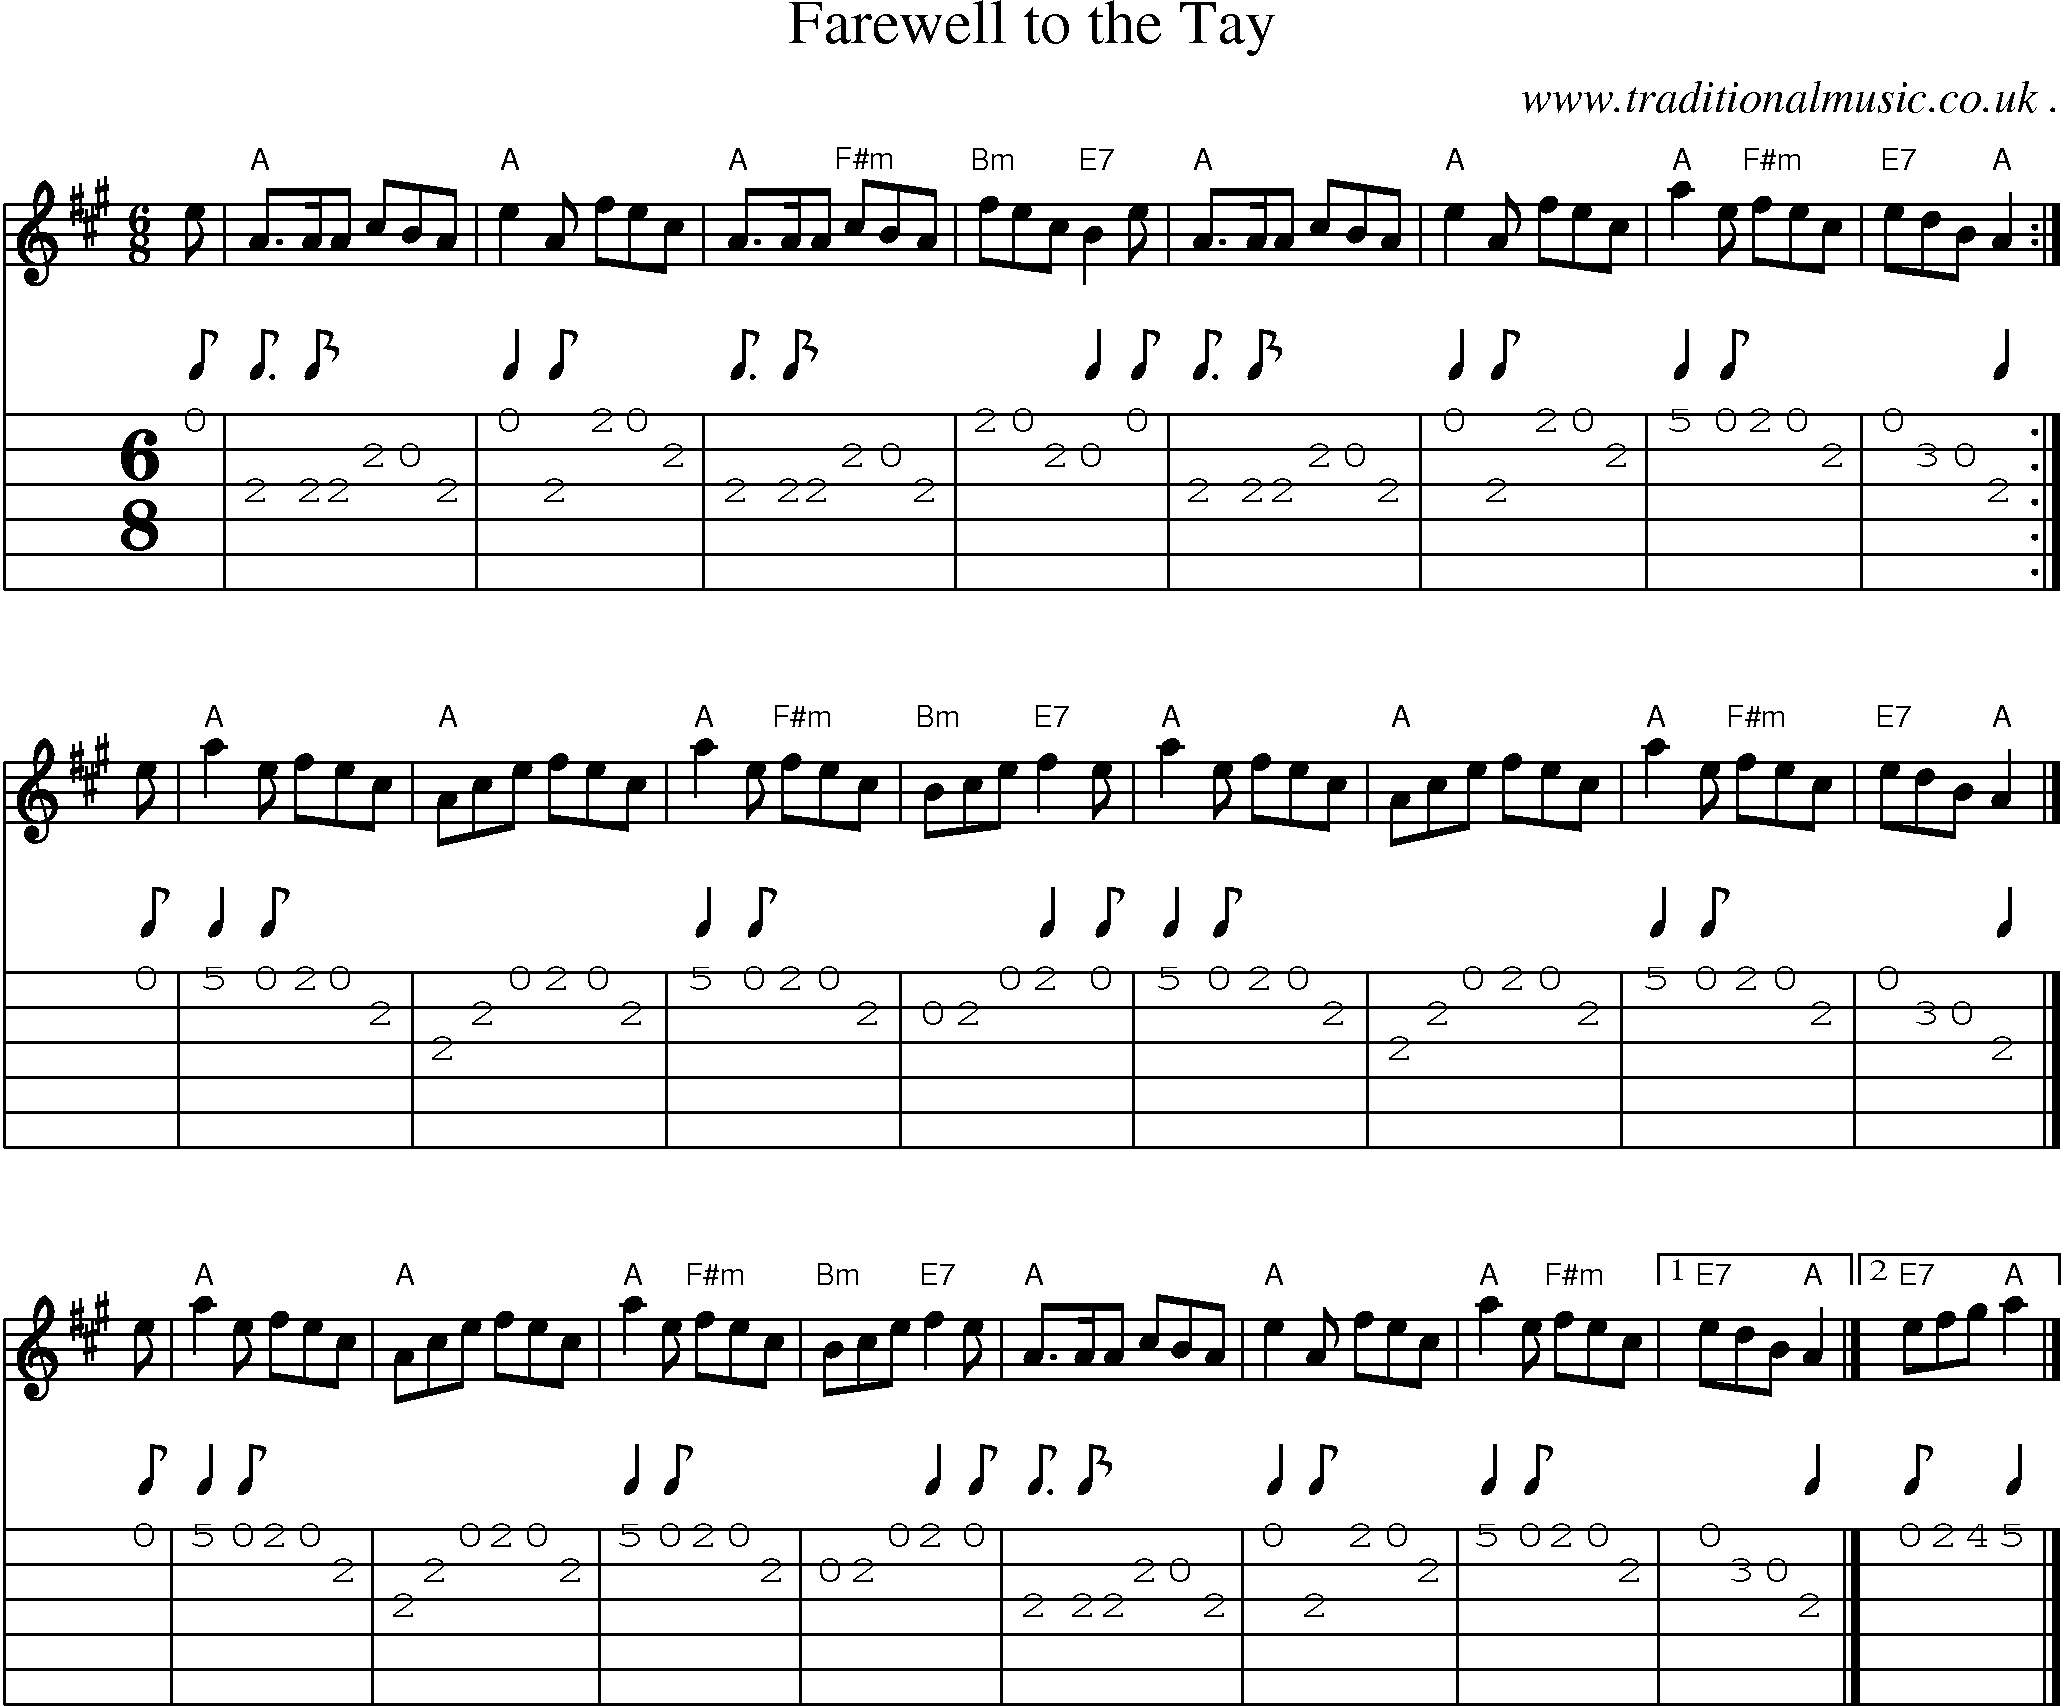 Sheet-music  score, Chords and Guitar Tabs for Farewell To The Tay